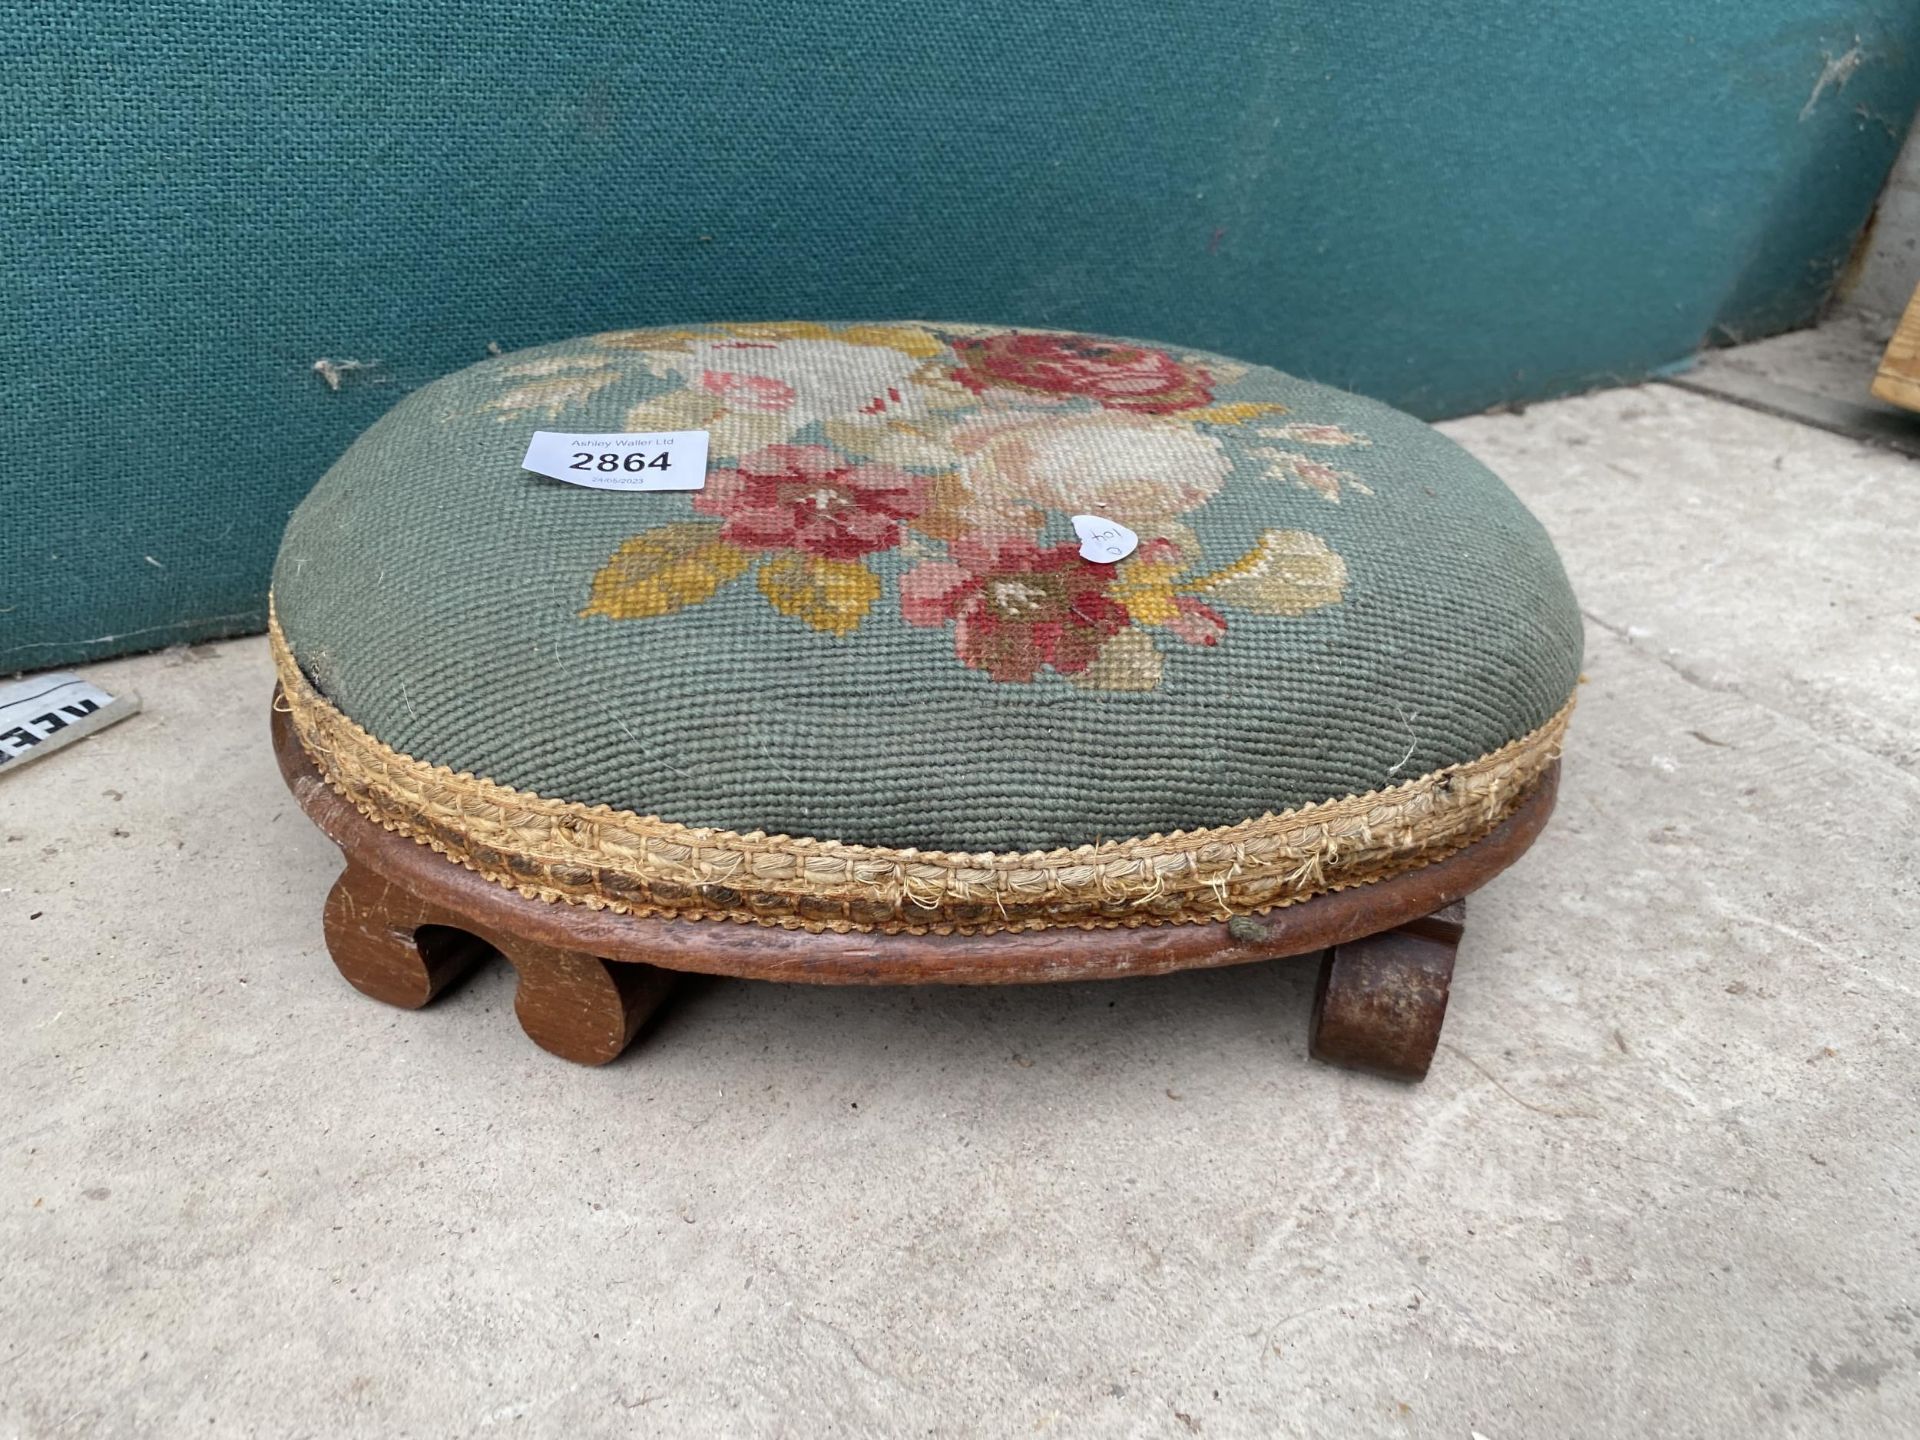 AN OVAL STOOL WITH WOOLWORK TOP, 13X10"